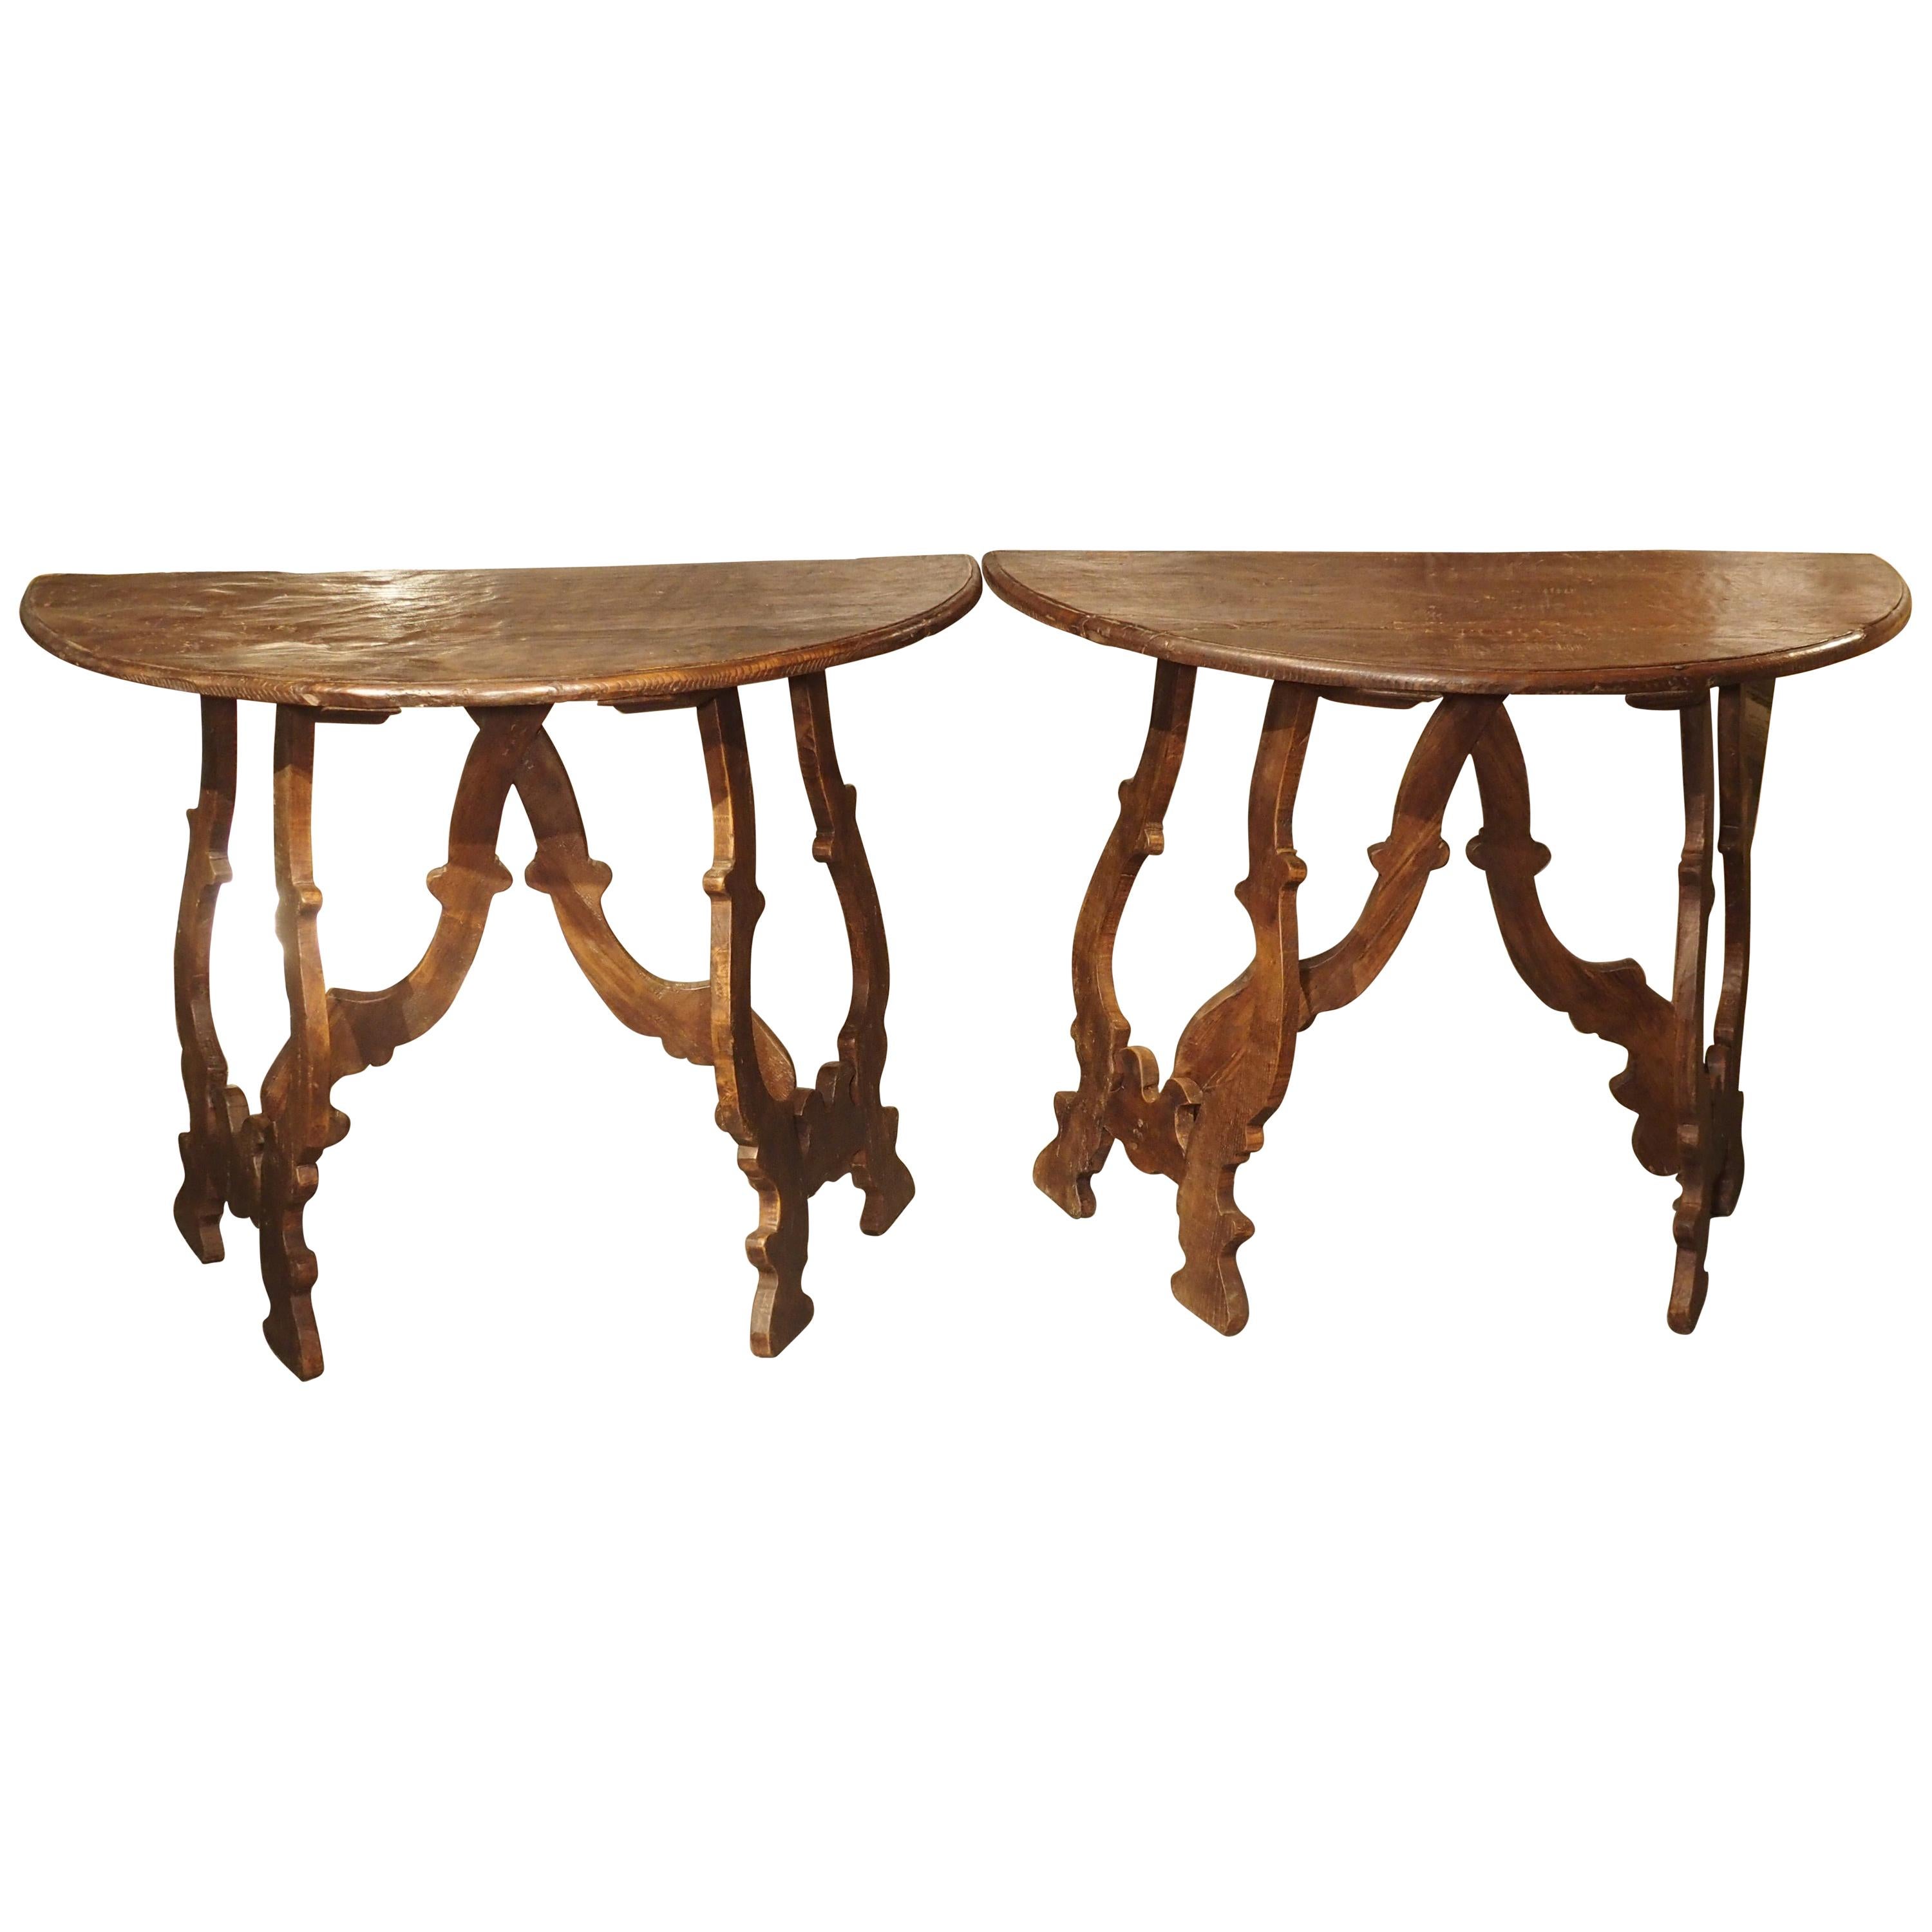 Pair of Italian Chestnut Wood Demi-Lune Console Tables